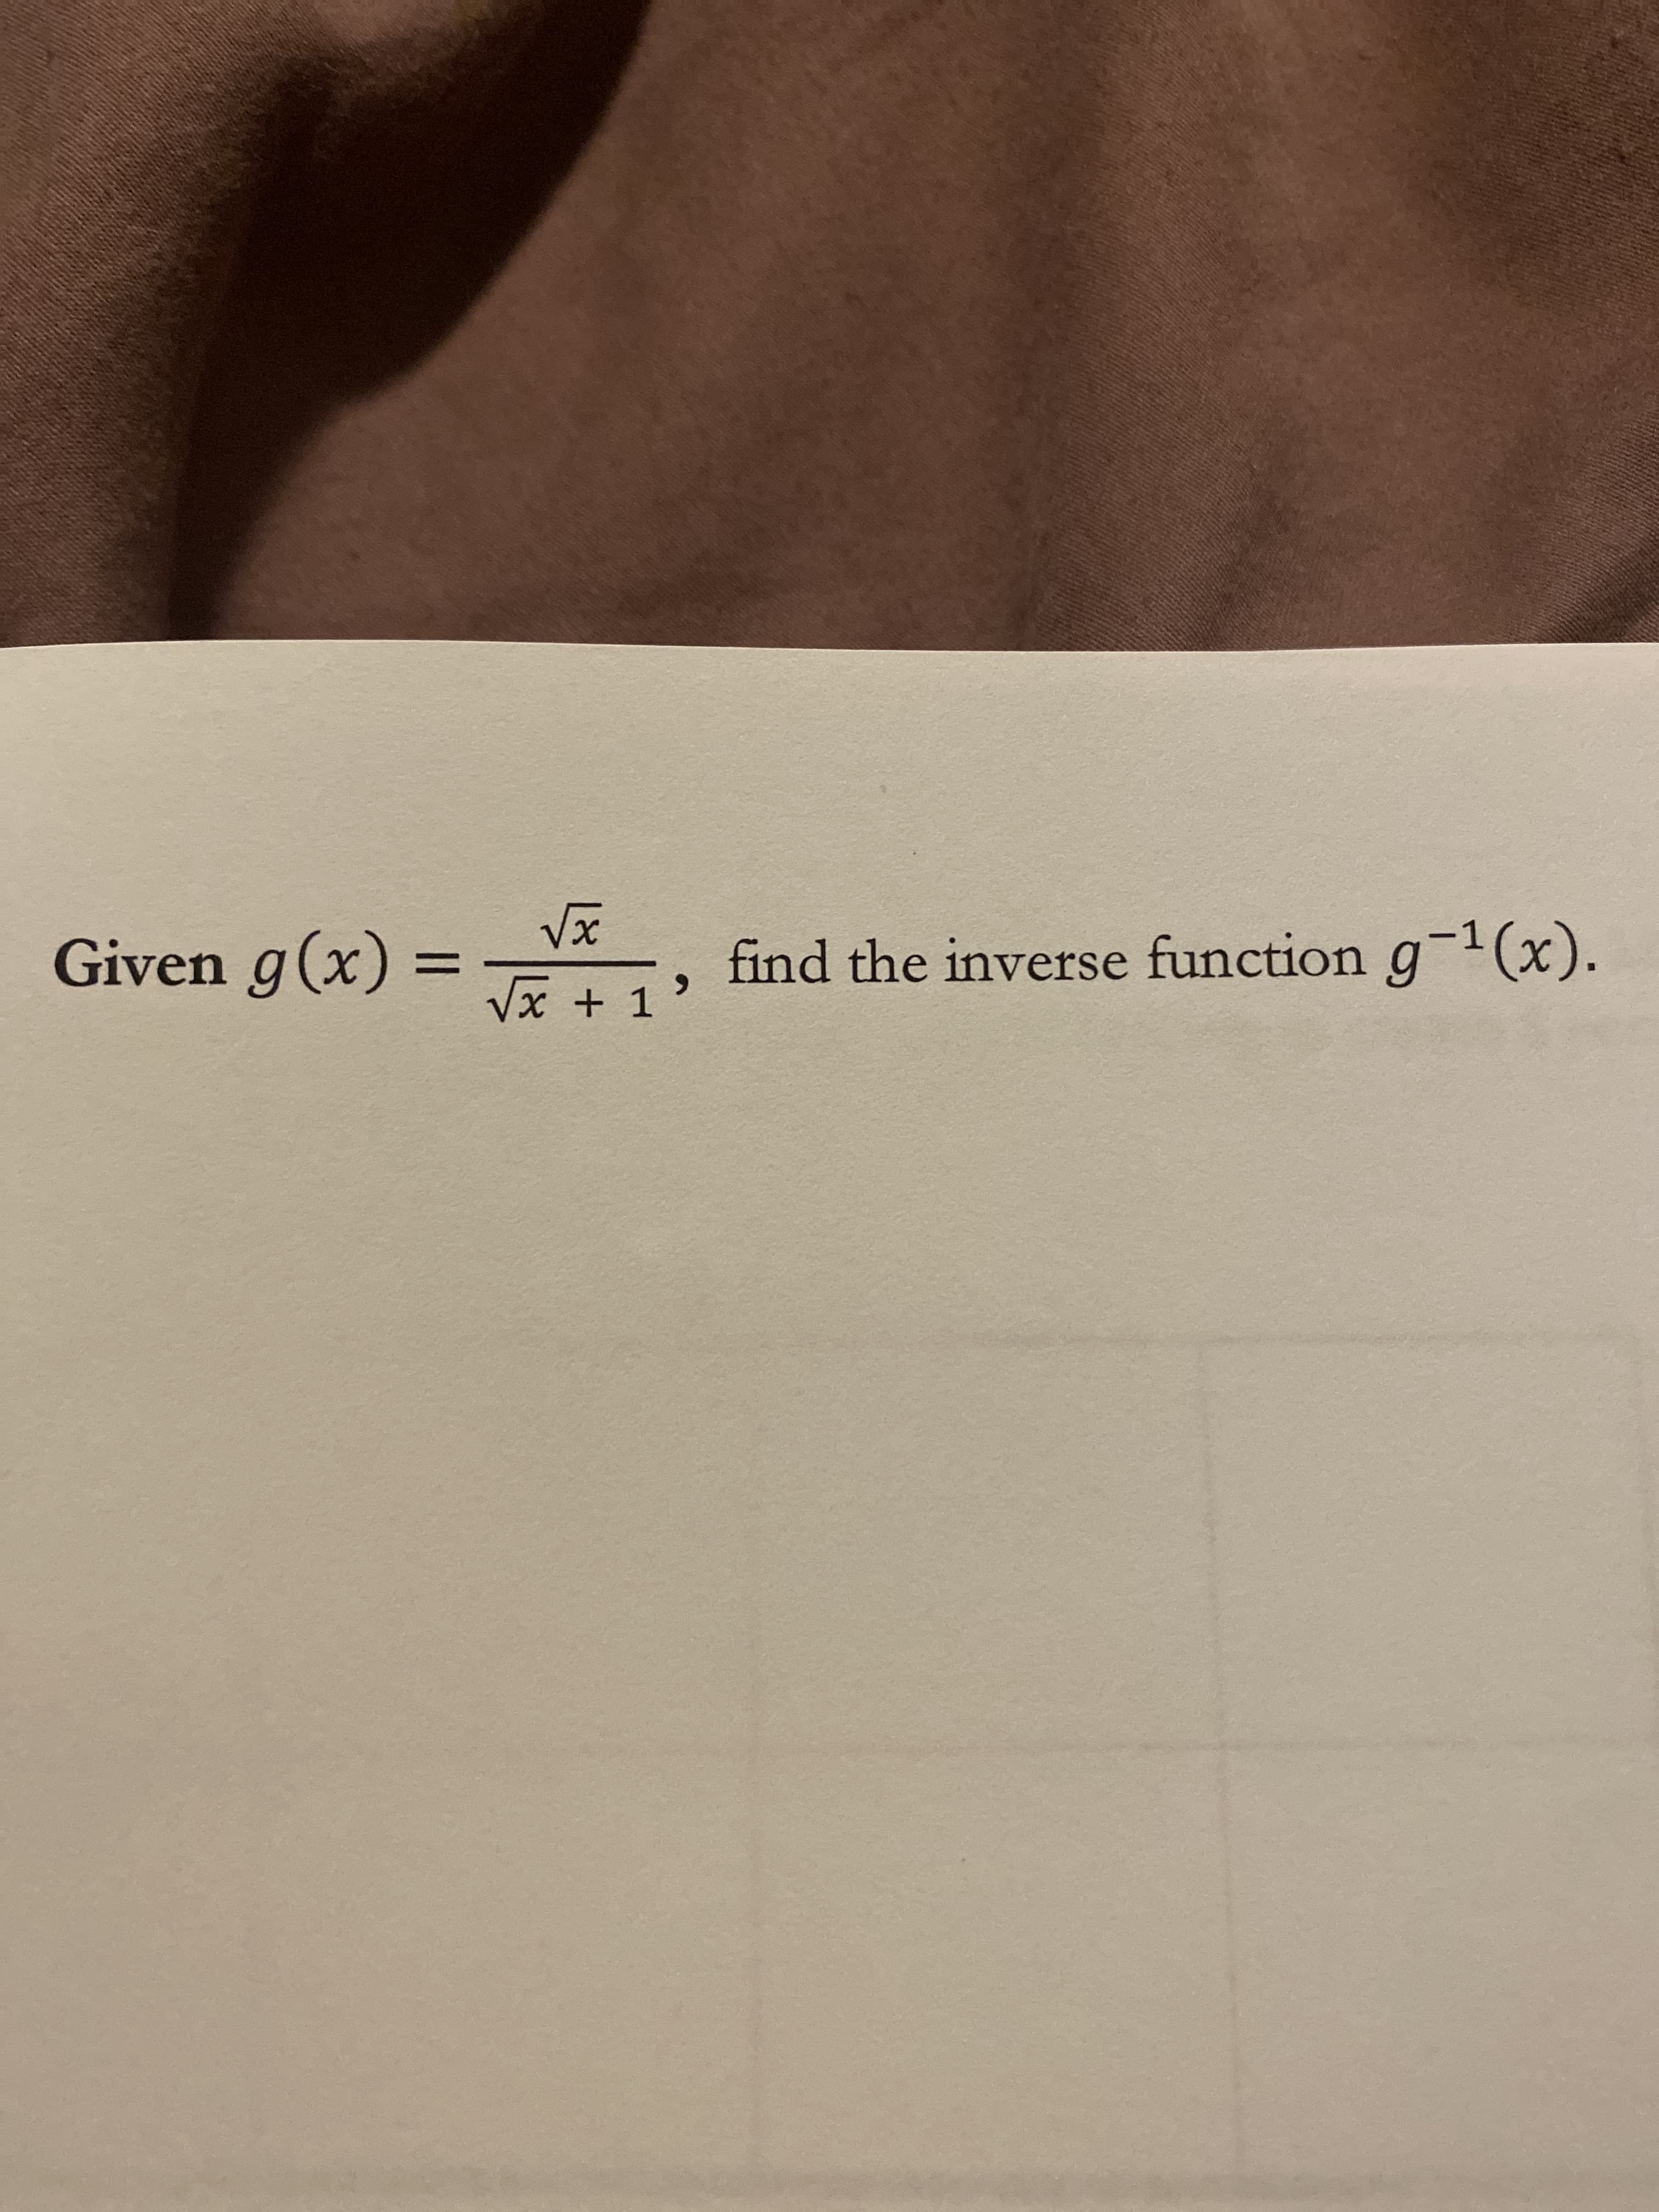 Given g(x) =
find the inverse function g(x).
%3D
Vx + 1
